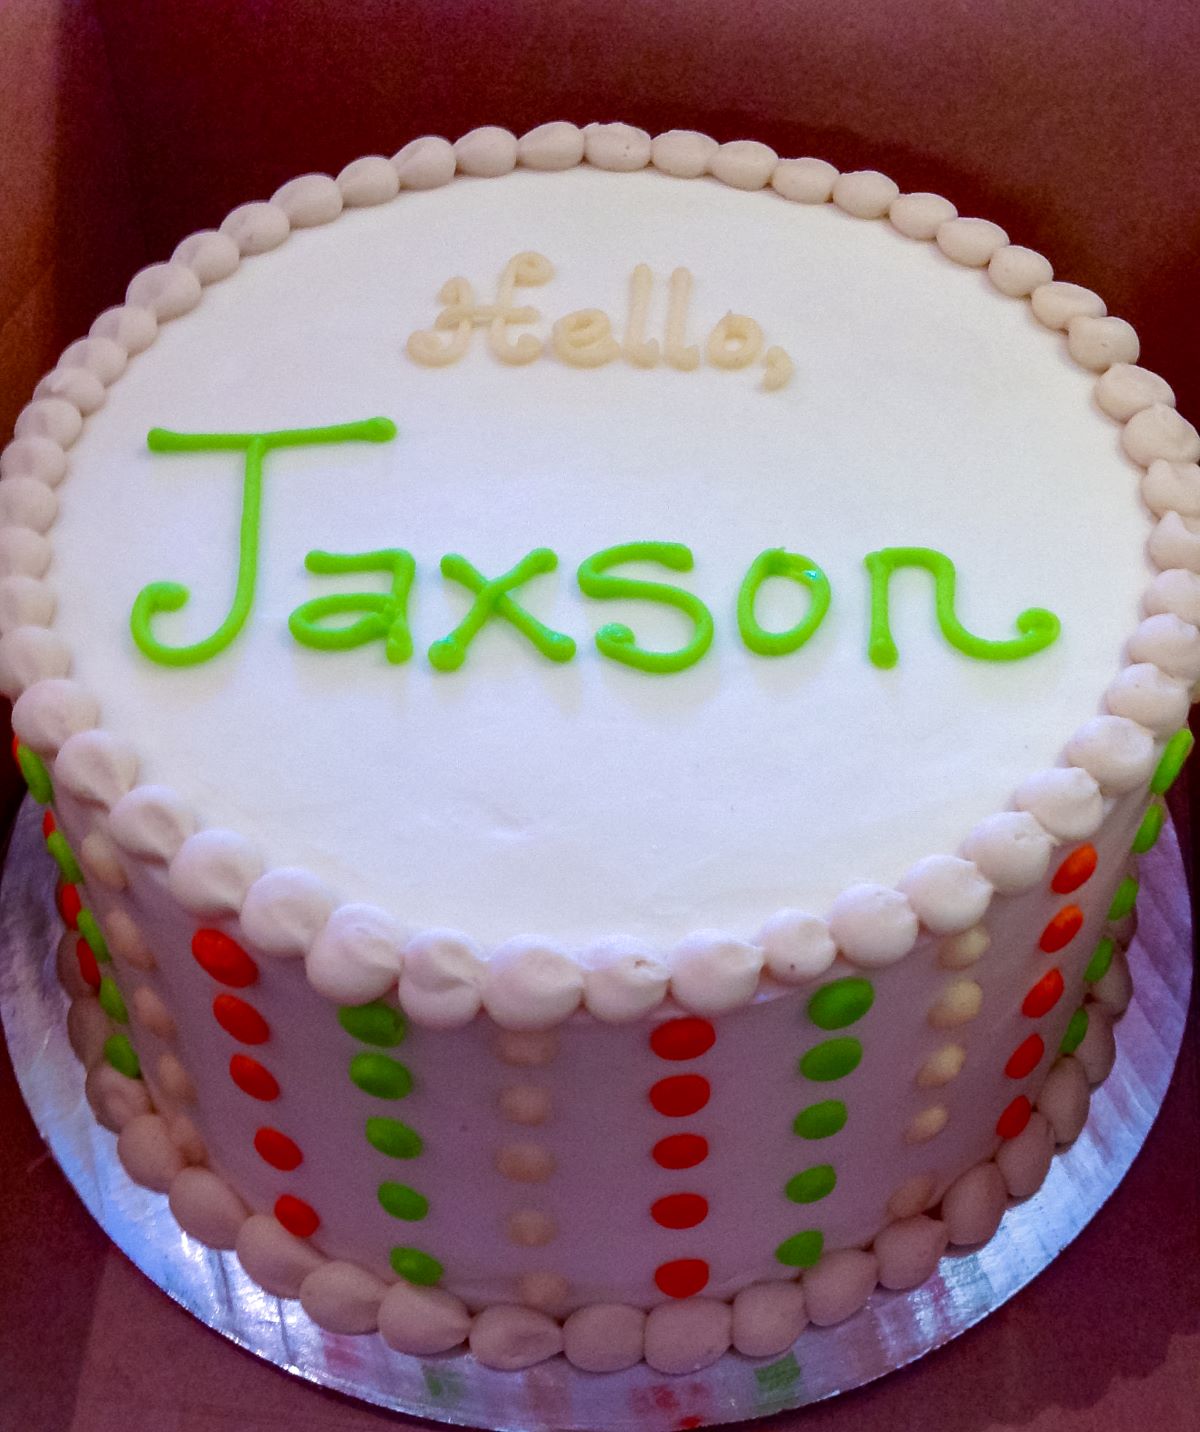 A smooth white cake with buttercream dots on the sides and a message of "Hello, jackson" on top of the cake.